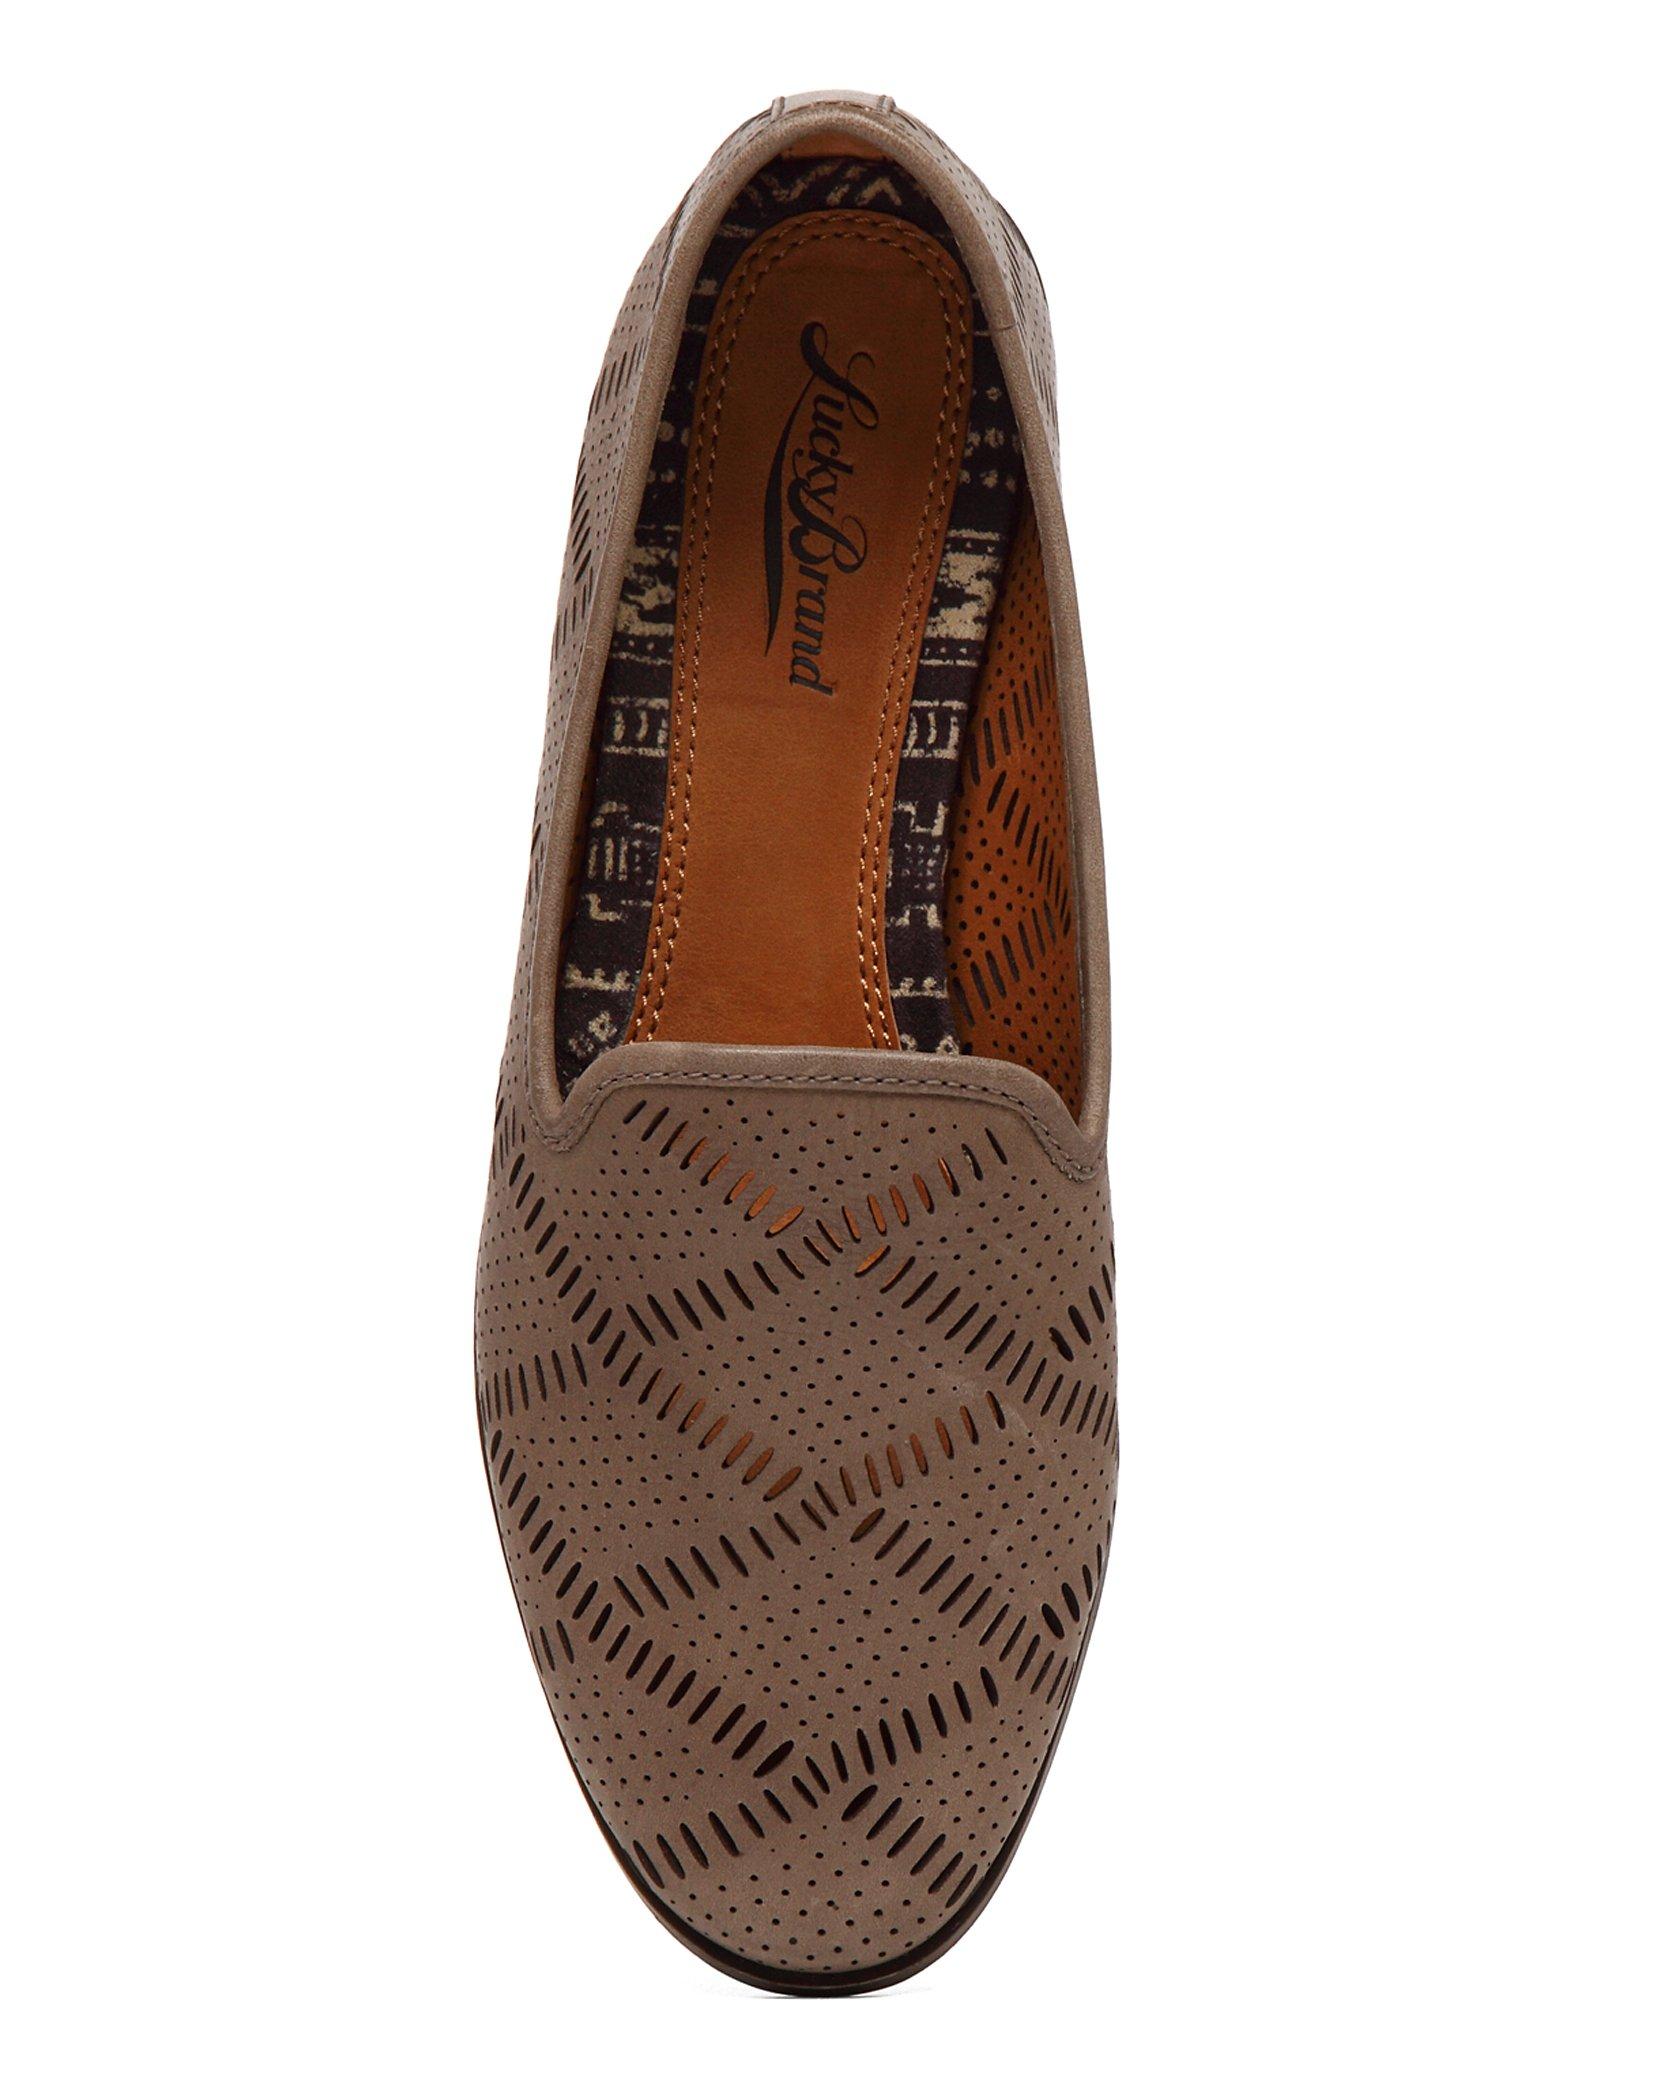 PARKERR PERFORATED LOAFER | Lucky Brand